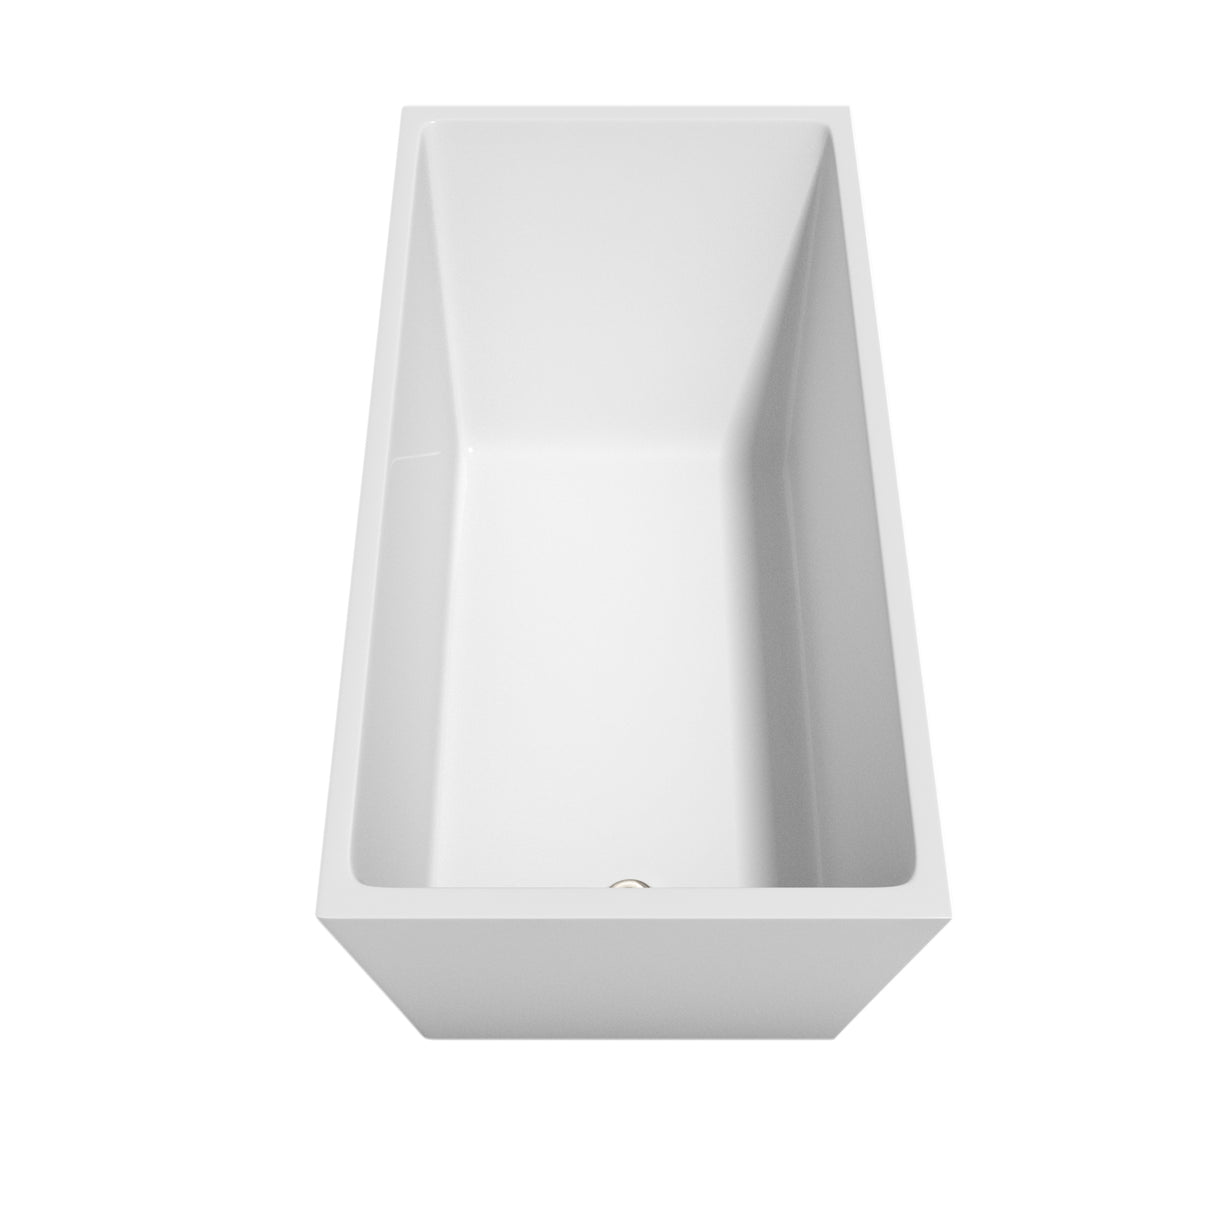 Hannah 59 Inch Freestanding Bathtub in White with Floor Mounted Faucet Drain and Overflow Trim in Brushed Nickel